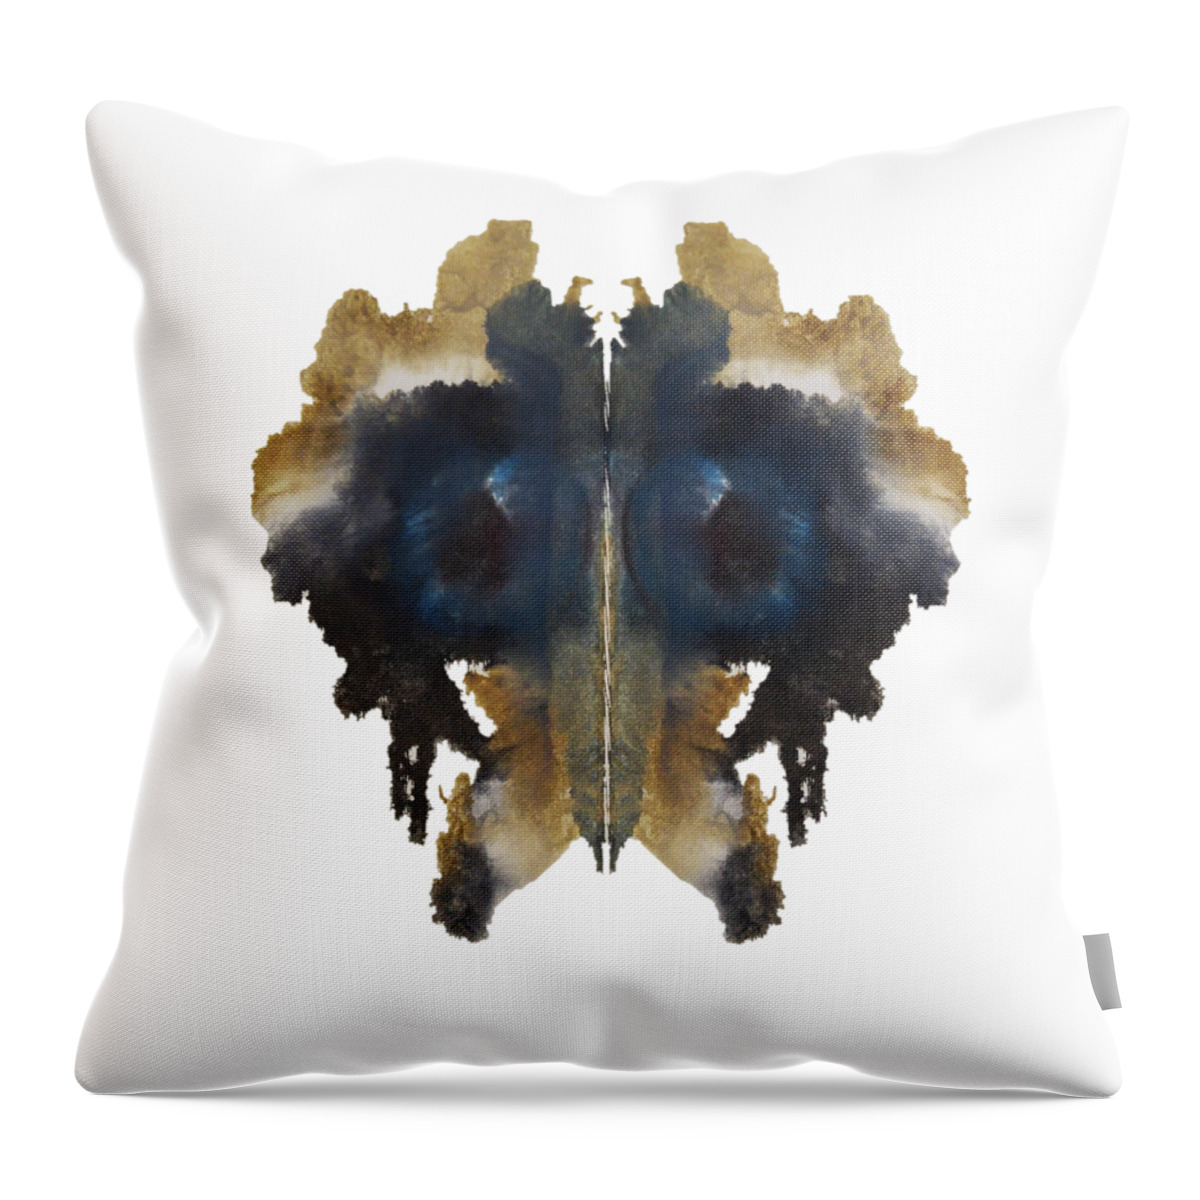 Abstract Throw Pillow featuring the painting Blue Eyes by Stephenie Zagorski